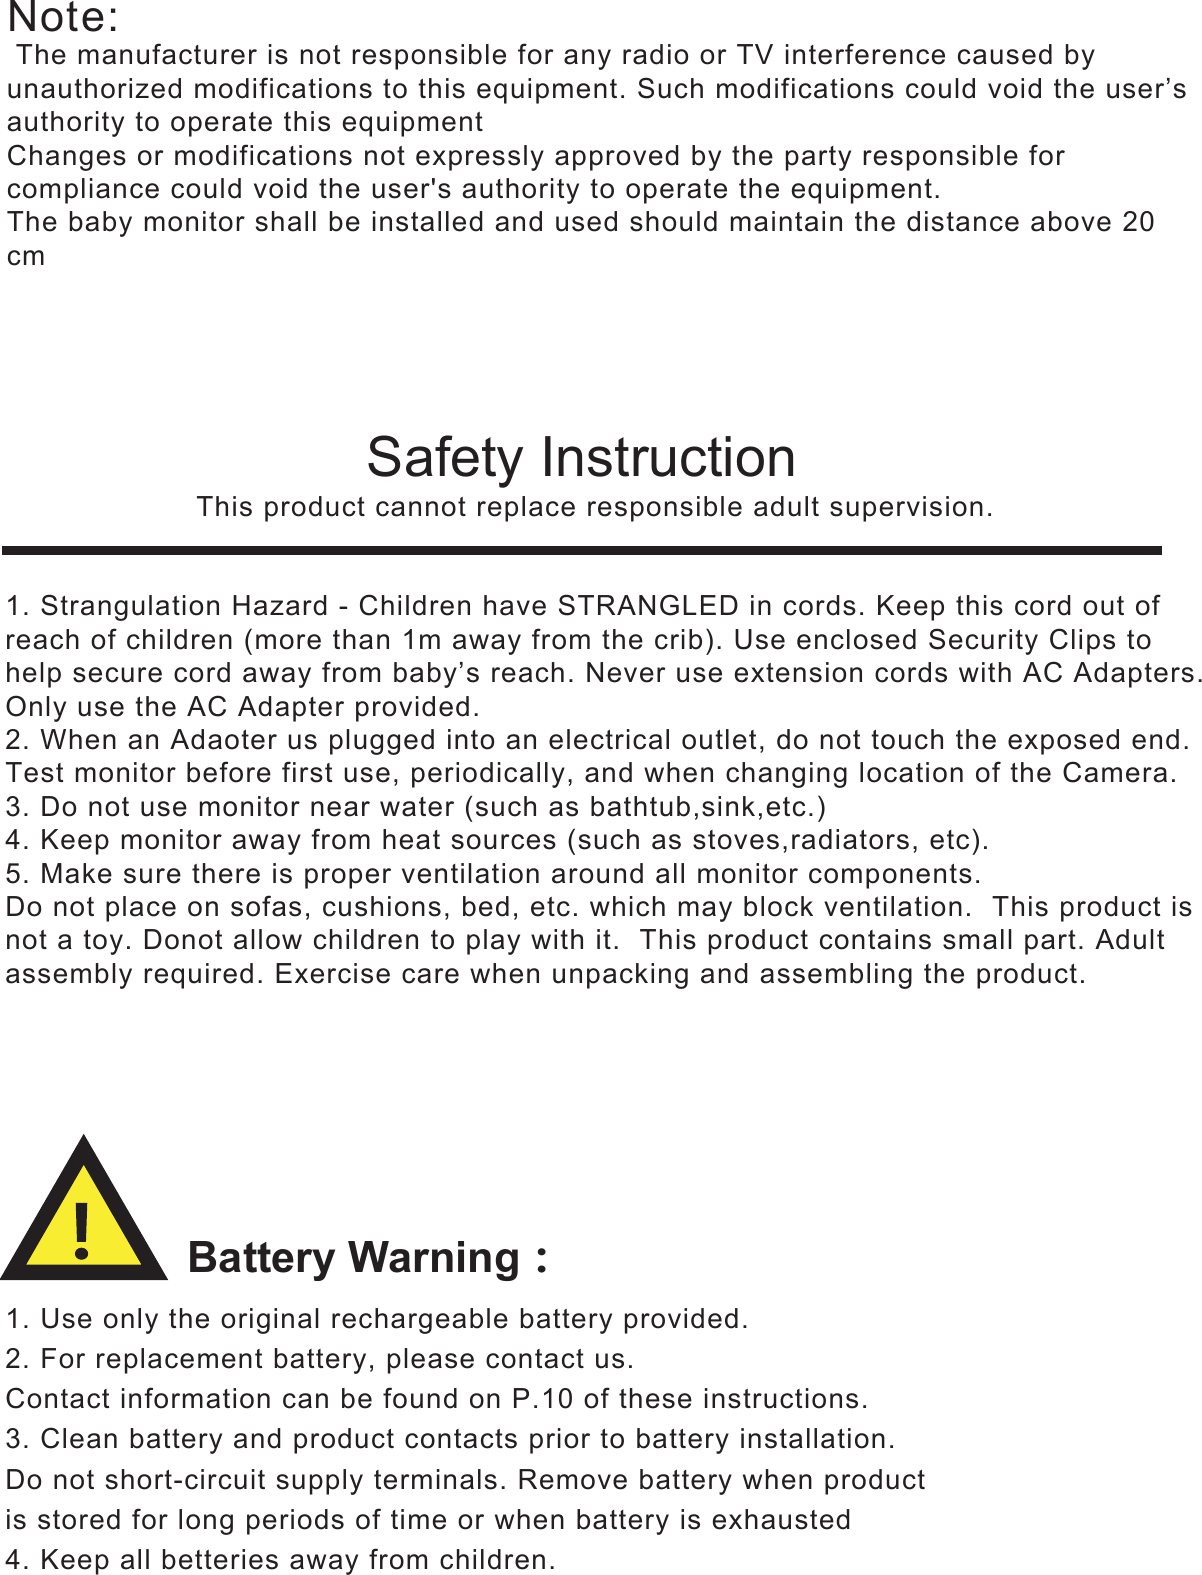 Battery Warning͵Safety Instruction   This product cannot replace responsible adult supervision.1. Use only the original rechargeable battery provided.2. For replacement battery, please contact us.Contact information can be found on P.10 of these instructions.3. Clean battery and product contacts prior to battery installation.Do not short-circuit supply terminals. Remove battery when productis stored for long periods of time or when battery is exhausted4. Keep all betteries away from children.1. Strangulation Hazard - Children have STRANGLED in cords. Keep this cord out ofreach of children (more than 1m away from the crib). Use enclosed Security Clips tohelp secure cord away from baby’s reach. Never use extension cords with AC Adapters. Only use the AC Adapter provided.2. When an Adaoter us plugged into an electrical outlet, do not touch the exposed end.Test monitor before first use, periodically, and when changing location of the Camera.3. Do not use monitor near water (such as bathtub,sink,etc.)4. Keep monitor away from heat sources (such as stoves,radiators, etc).5. Make sure there is proper ventilation around all monitor components.Do not place on sofas, cushions, bed, etc. which may block ventilation.  This product isnot a toy. Donot allow children to play with it.  This product contains small part. Adultassembly required. Exercise care when unpacking and assembling the product.Note: The manufacturer is not responsible for any radio or TV interference caused by unauthorized modifications to this equipment. Such modifications could void the user’s authority to operate this equipmentChanges or modifications not expressly approved by the party responsible for compliance could void the user&apos;s authority to operate the equipment.The EDE\PRQLWRUshall be installed and used should maintain the distance above 20 cm